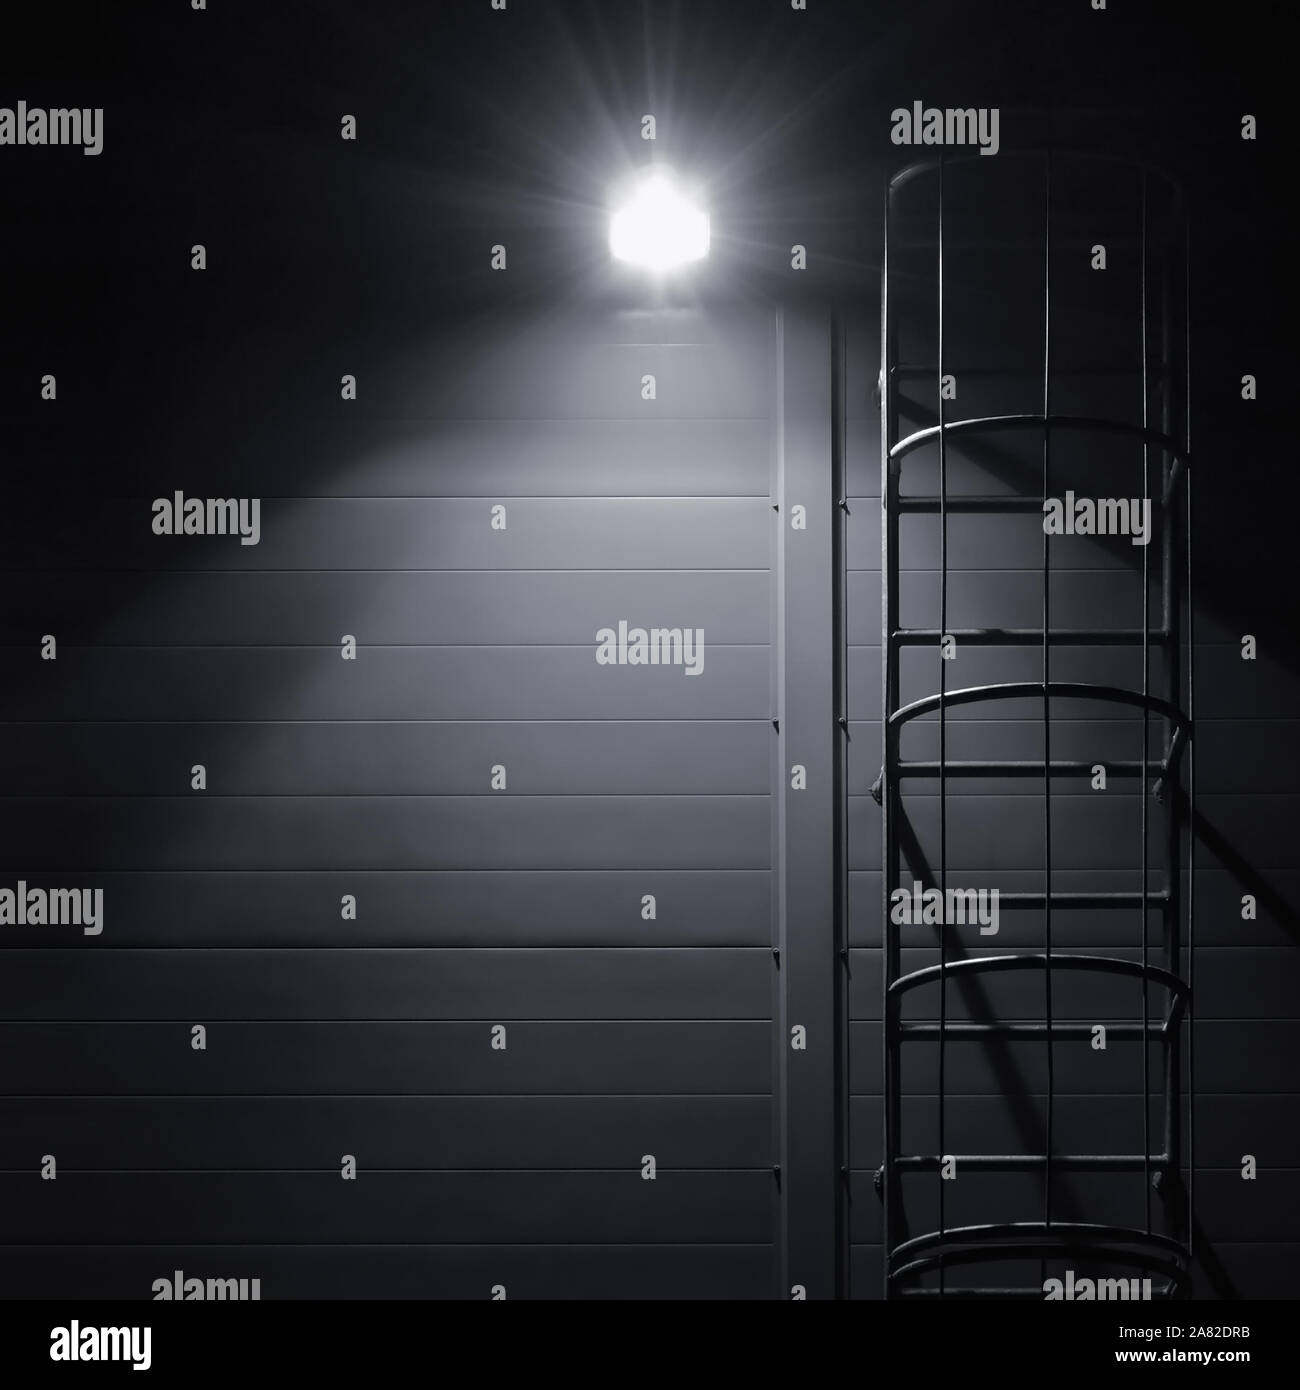 Fire emergency rescue access escape ladder stairway, roof maintenance stairs at night, bright shining lantern lamp light illumination glow shadows Stock Photo